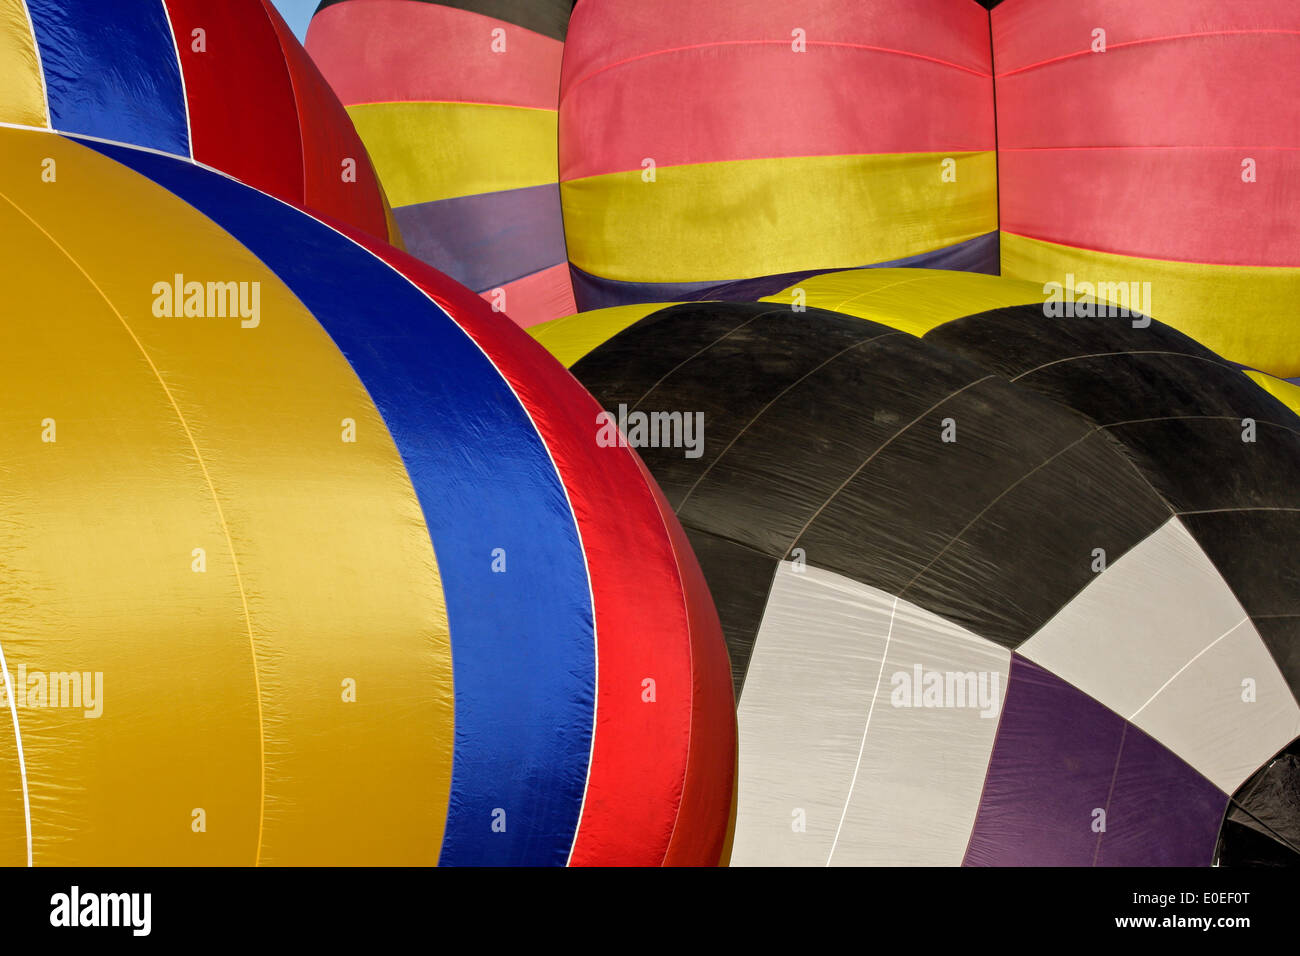 Close-up view of colorful hot air balloons Stock Photo